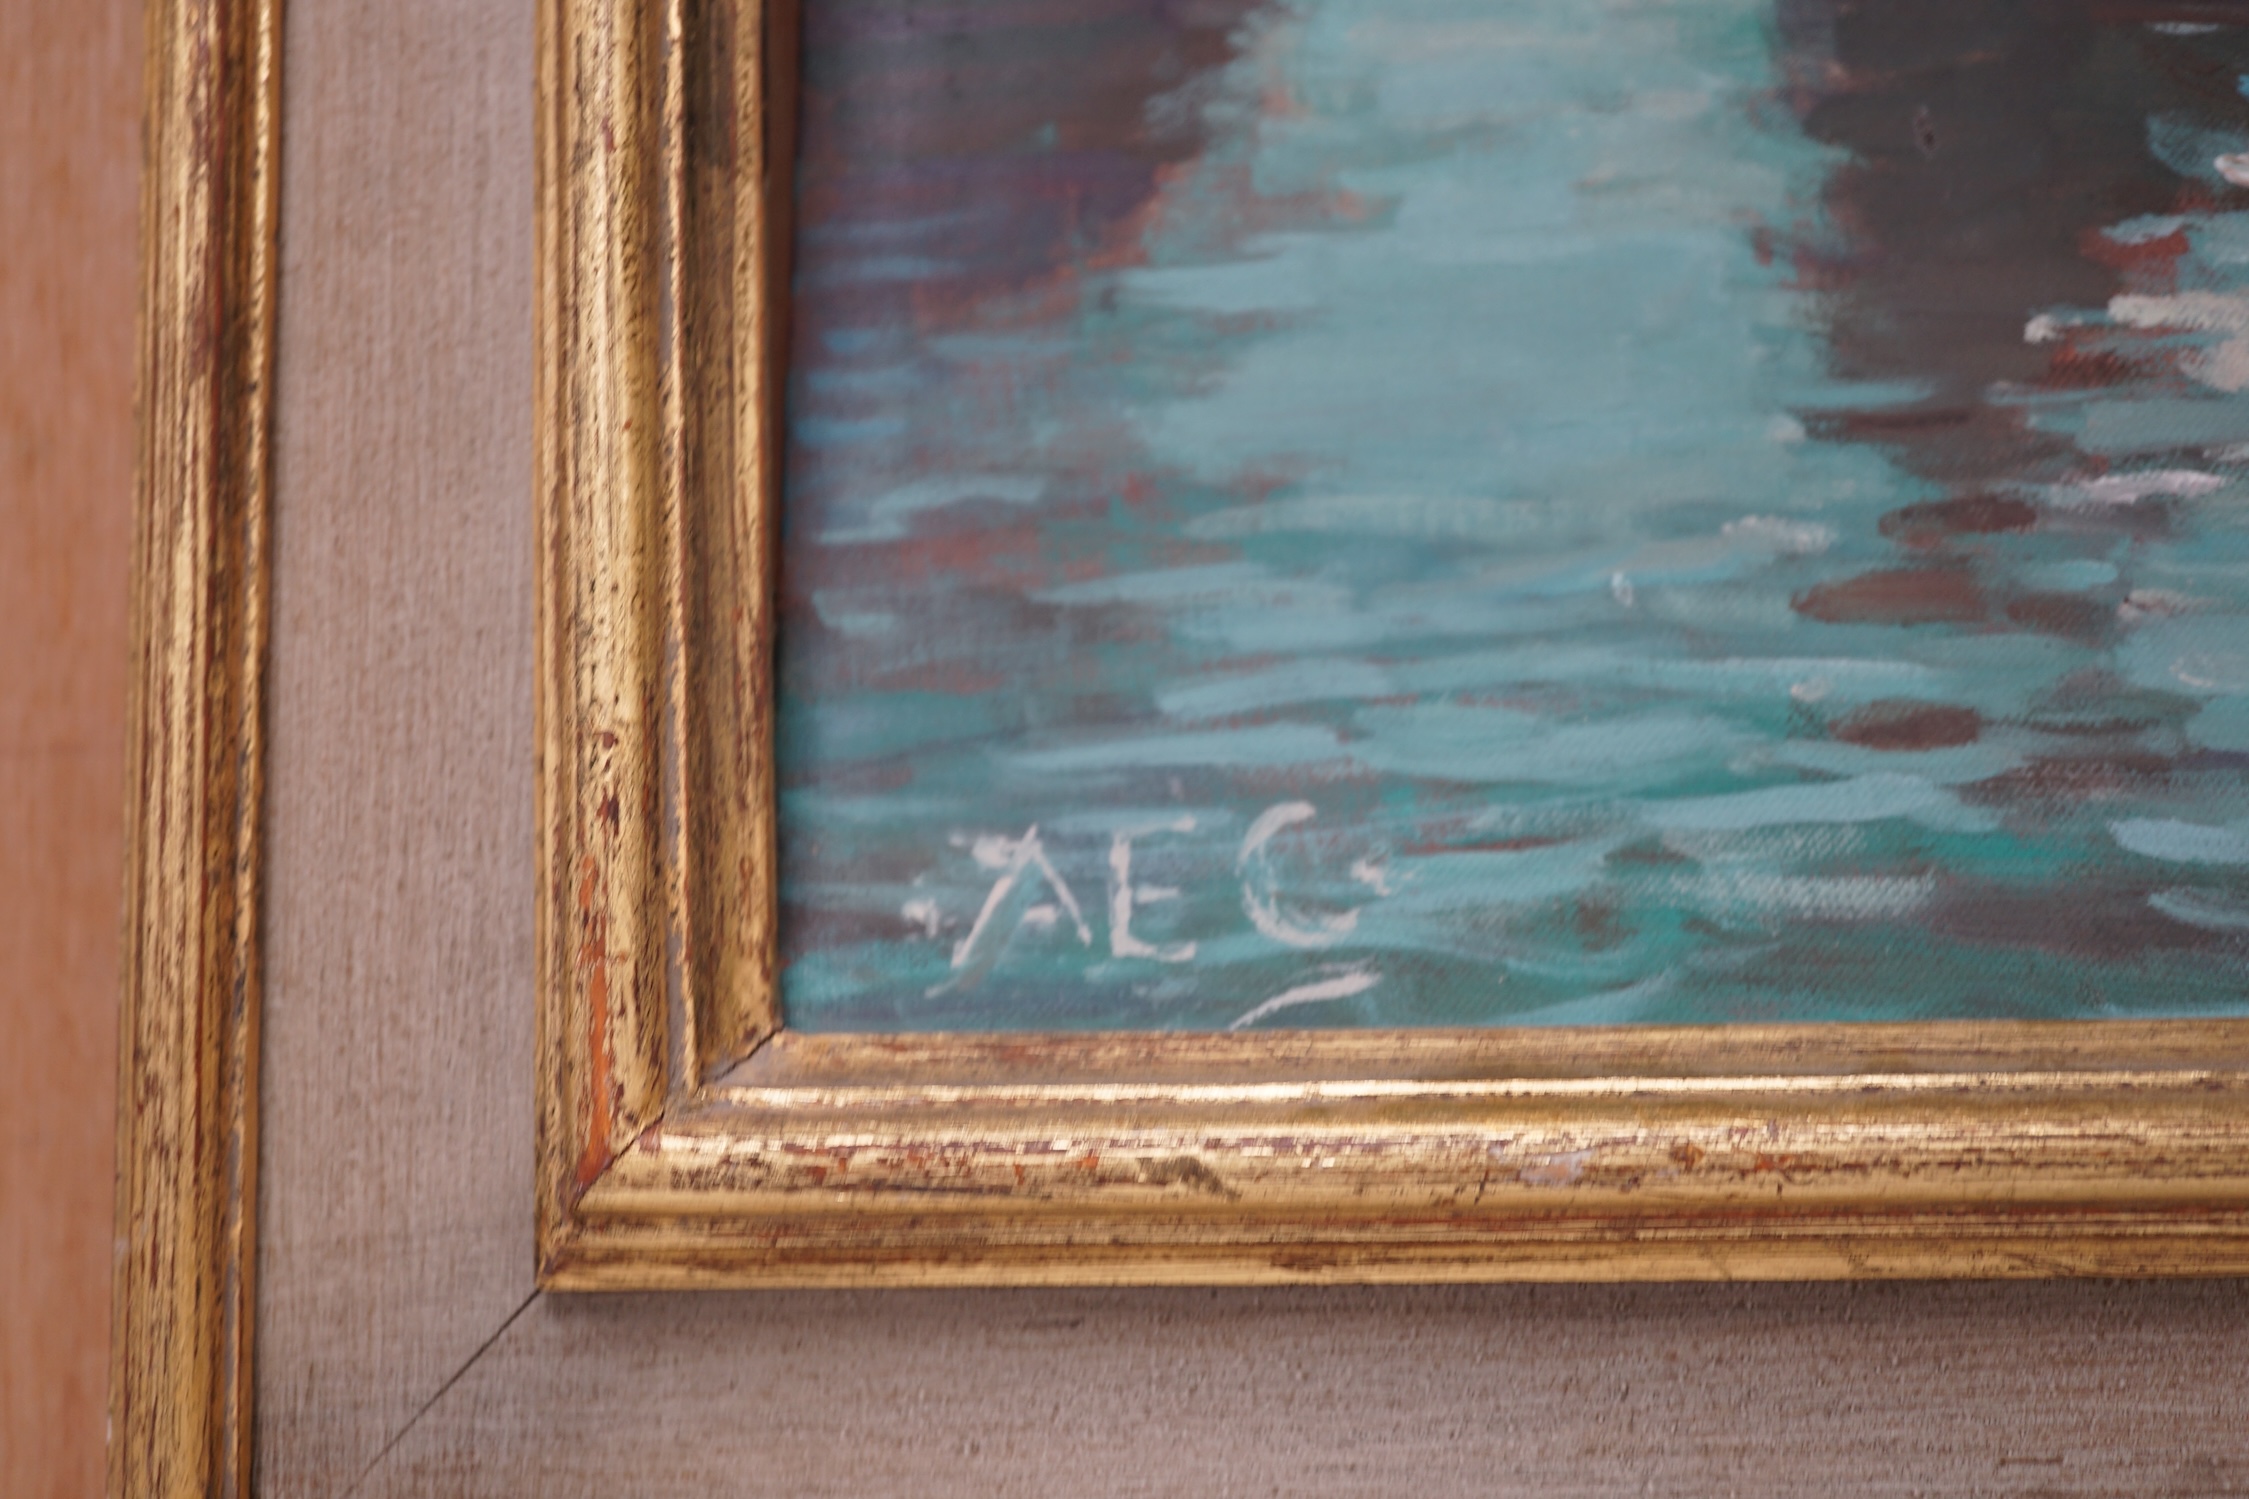 Alfred Egerton Cooper (1883-1974), oil on board, 'Yachts, Grandtully, Perthshire', monogrammed, Artists of Chelsea inscribed label verso, 40 x 50cm. Condition - fair, board warped and loose within frame